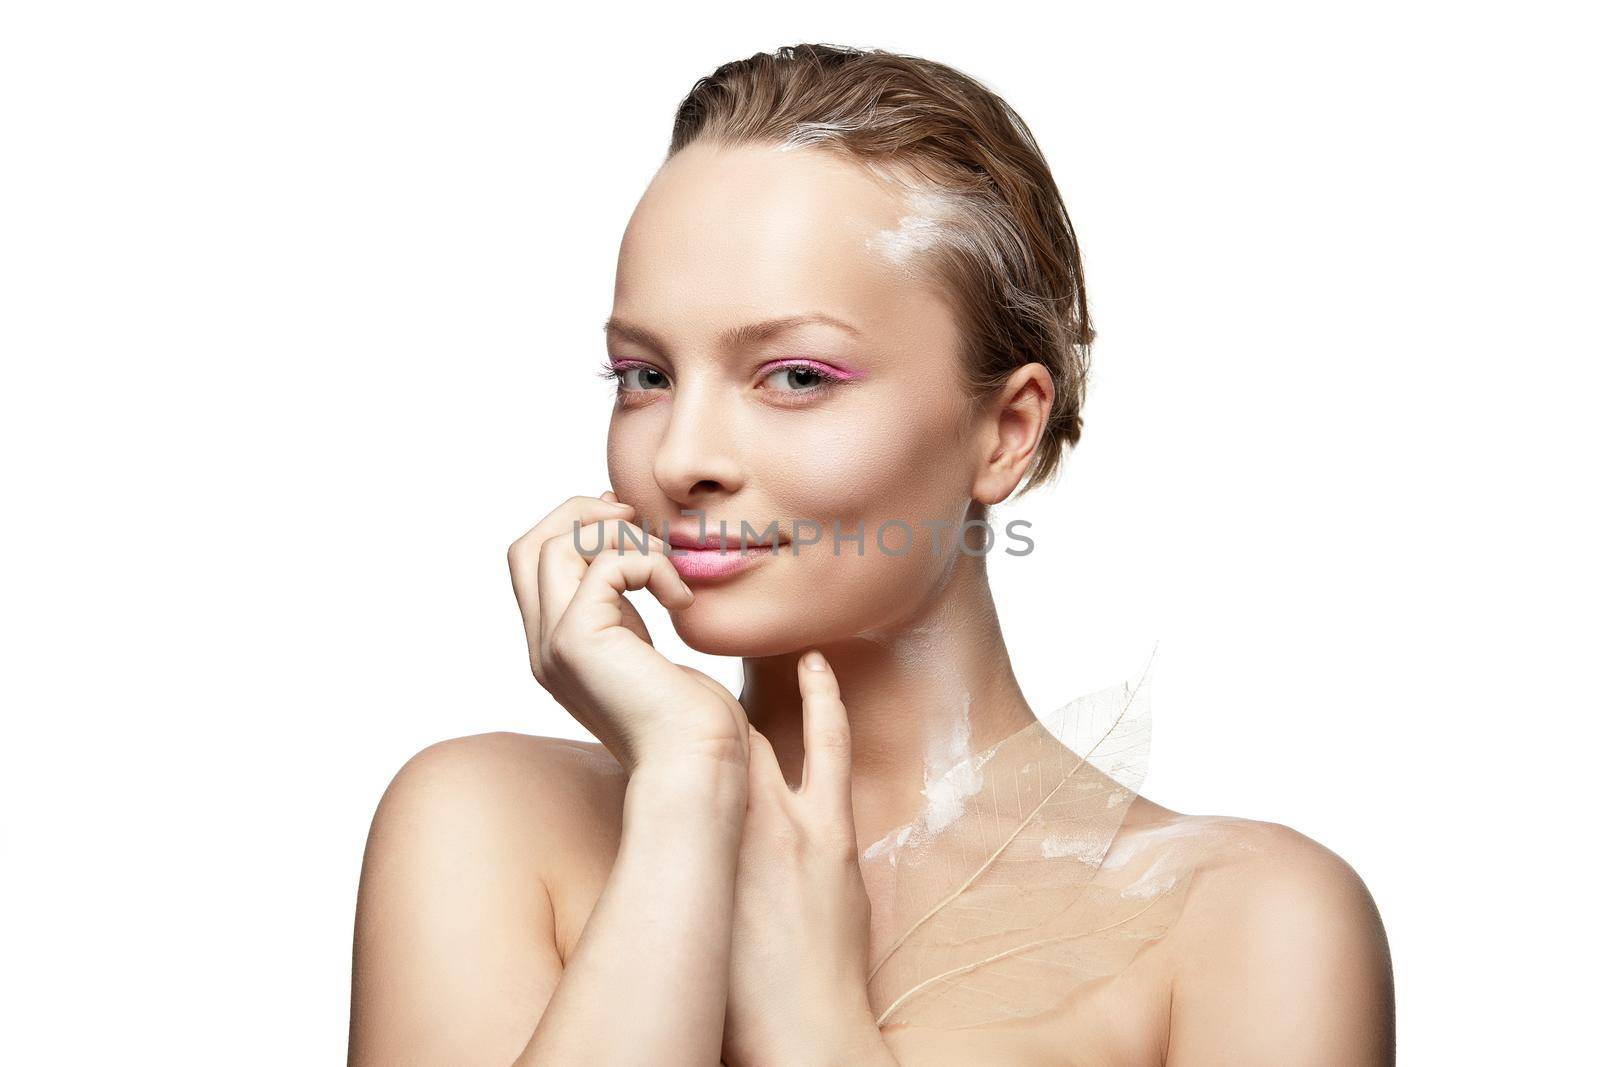 Beautyful smiling woman with creative make-up and white paint on body isolated